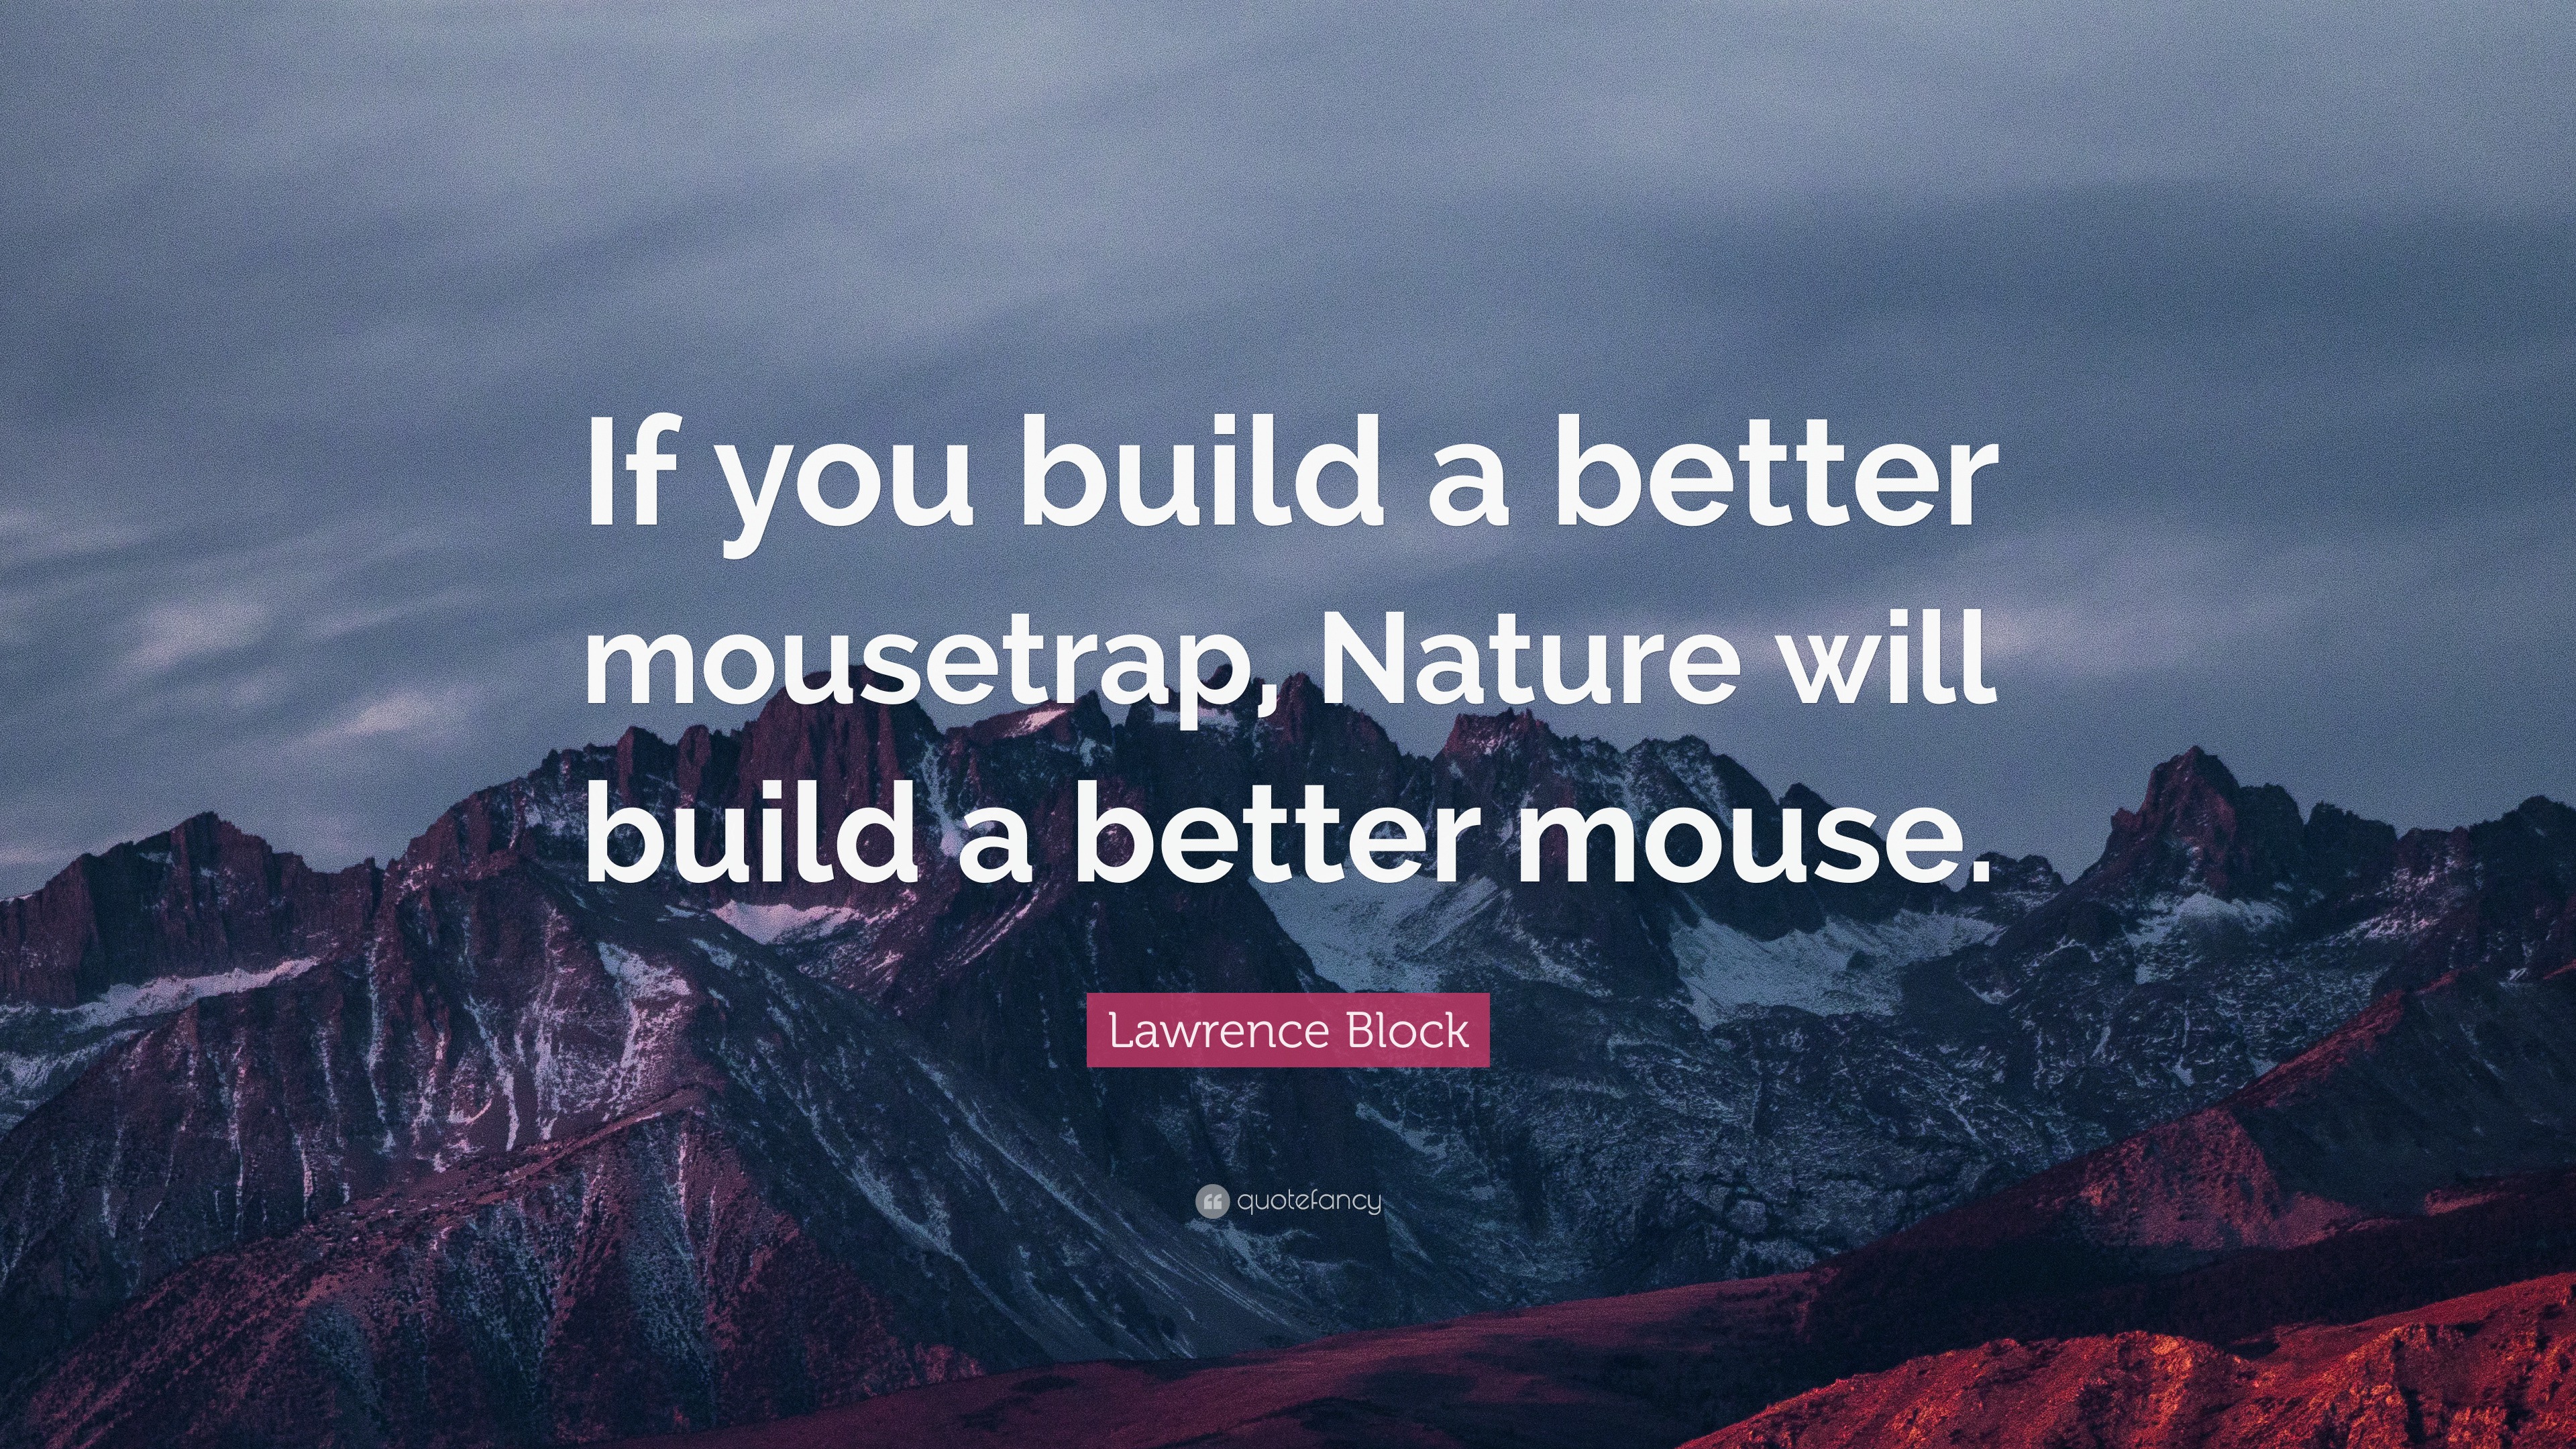 https://quotefancy.com/media/wallpaper/3840x2160/2993741-Lawrence-Block-Quote-If-you-build-a-better-mousetrap-Nature-will.jpg